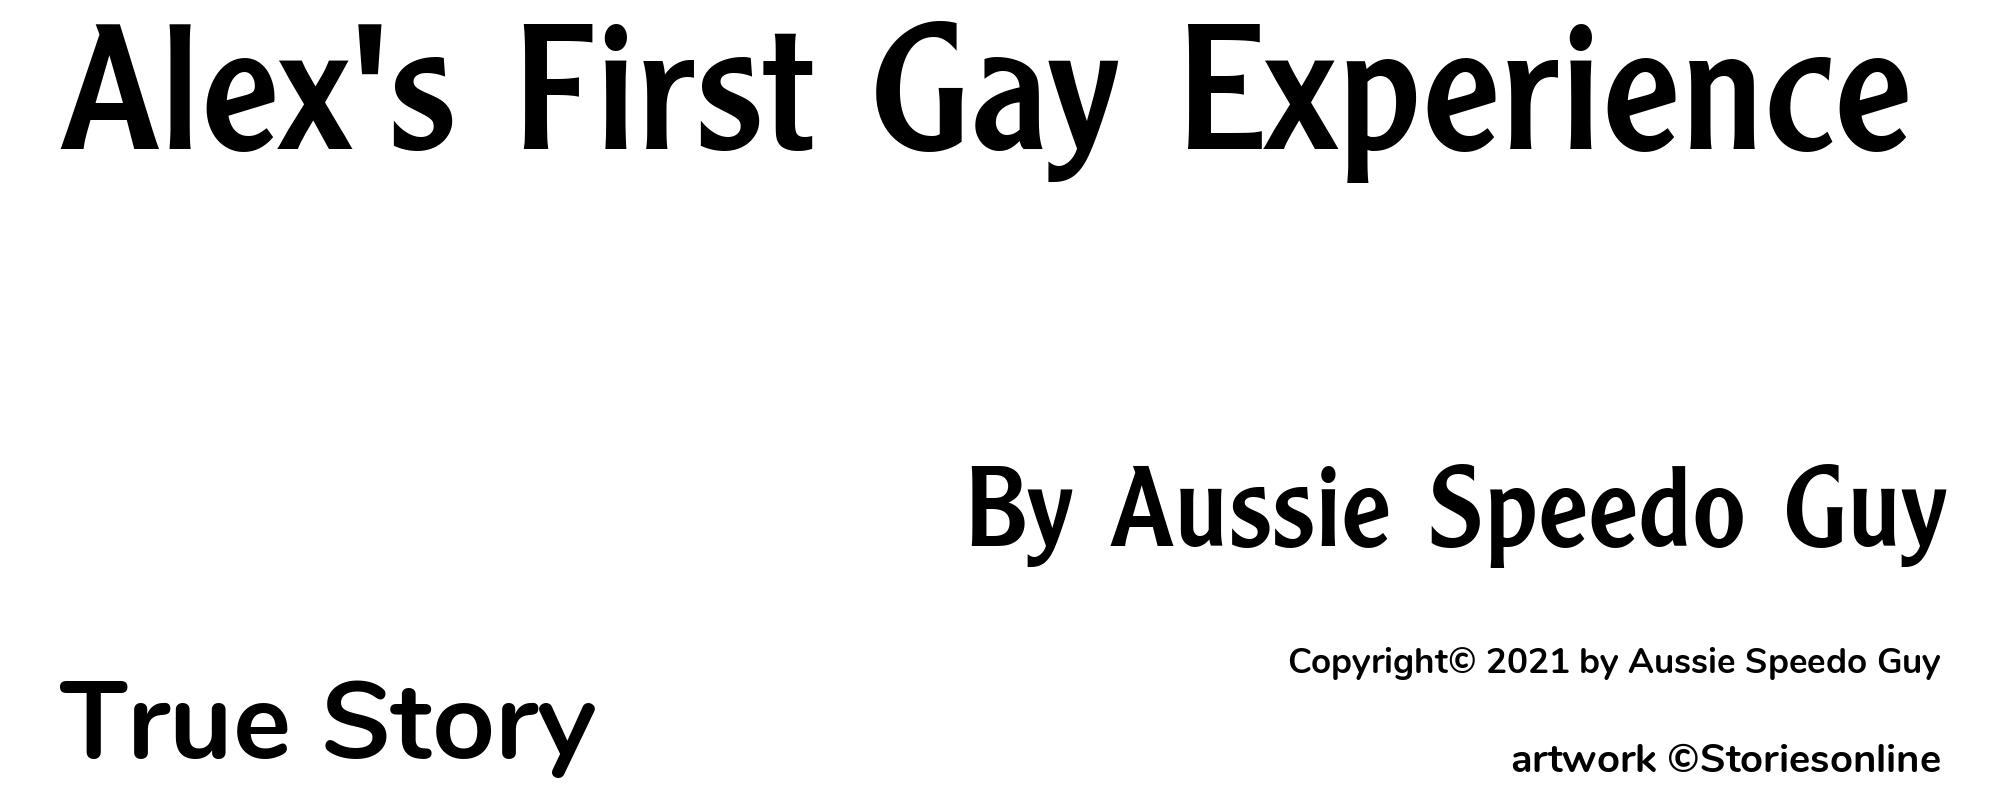 Alex's First Gay Experience - Cover